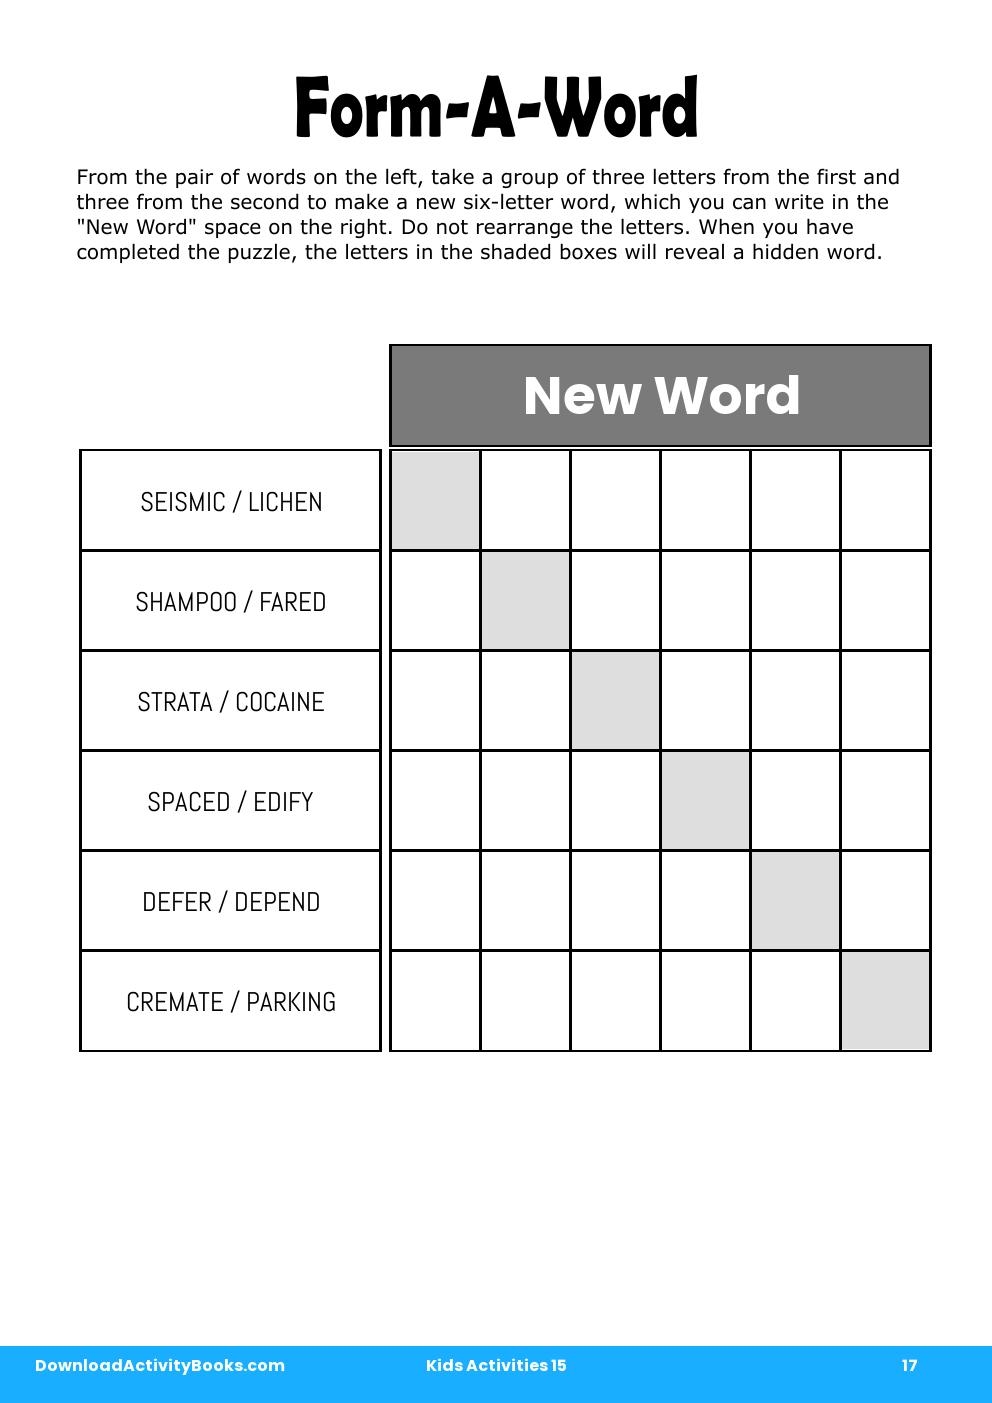 Form-A-Word in Kids Activities 15